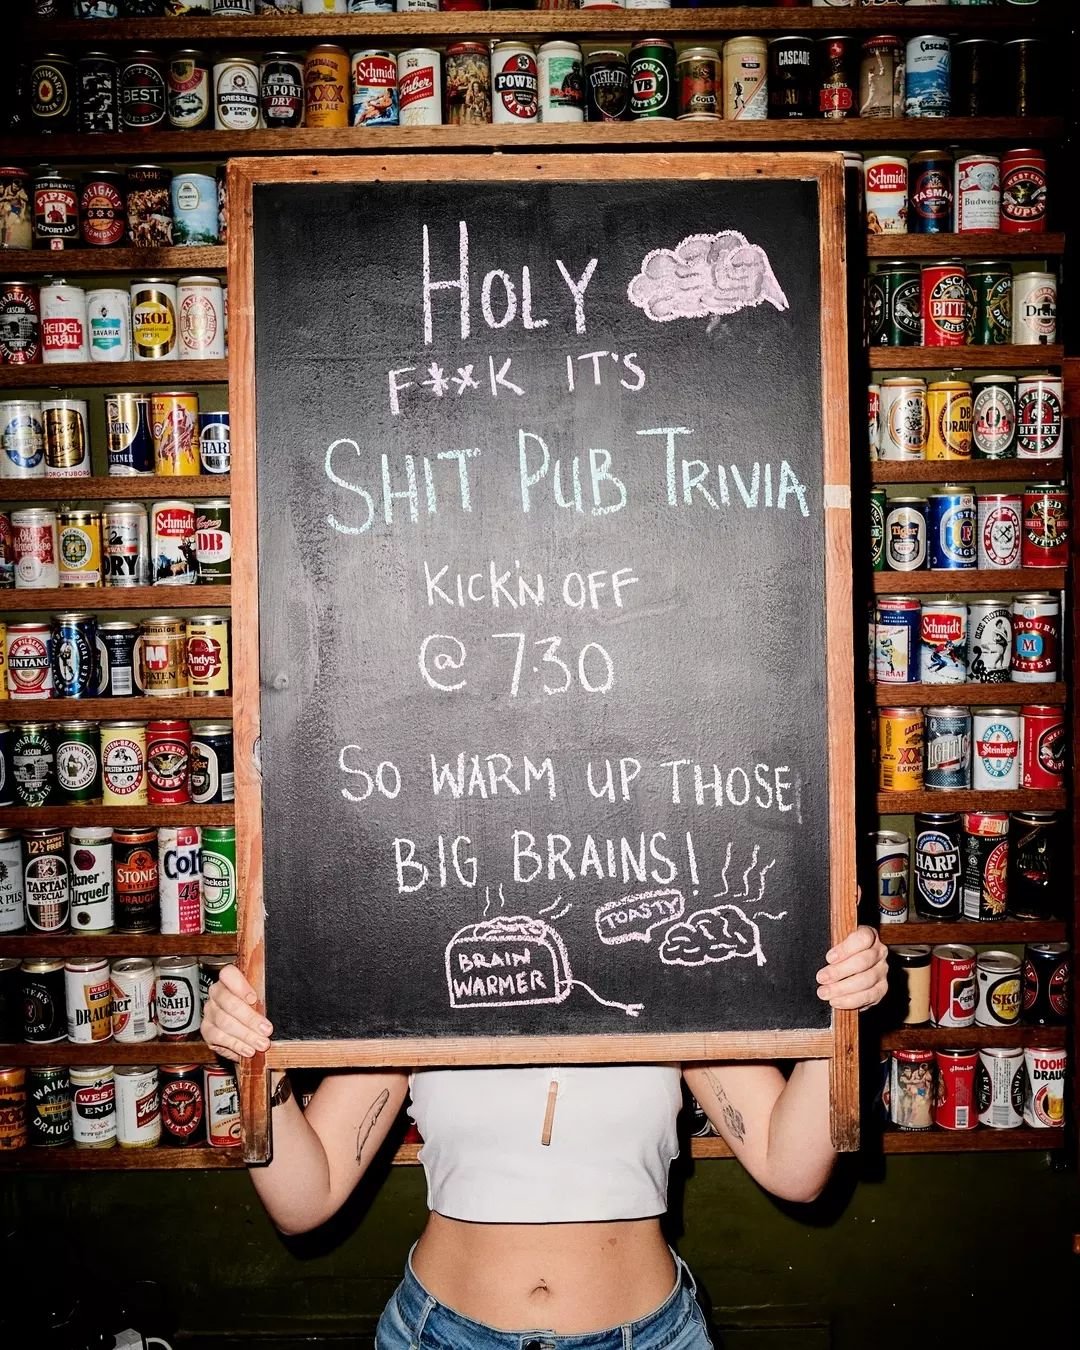 Place your thinking caps firmly on your noggins and rally your brains trust for some Shit Pub Trivia tonight with @shitpubtrivia 🧠

Heaps of prizes to win and beers to drink, give us a call to book your table! Kicking off at 7.30pm 👊